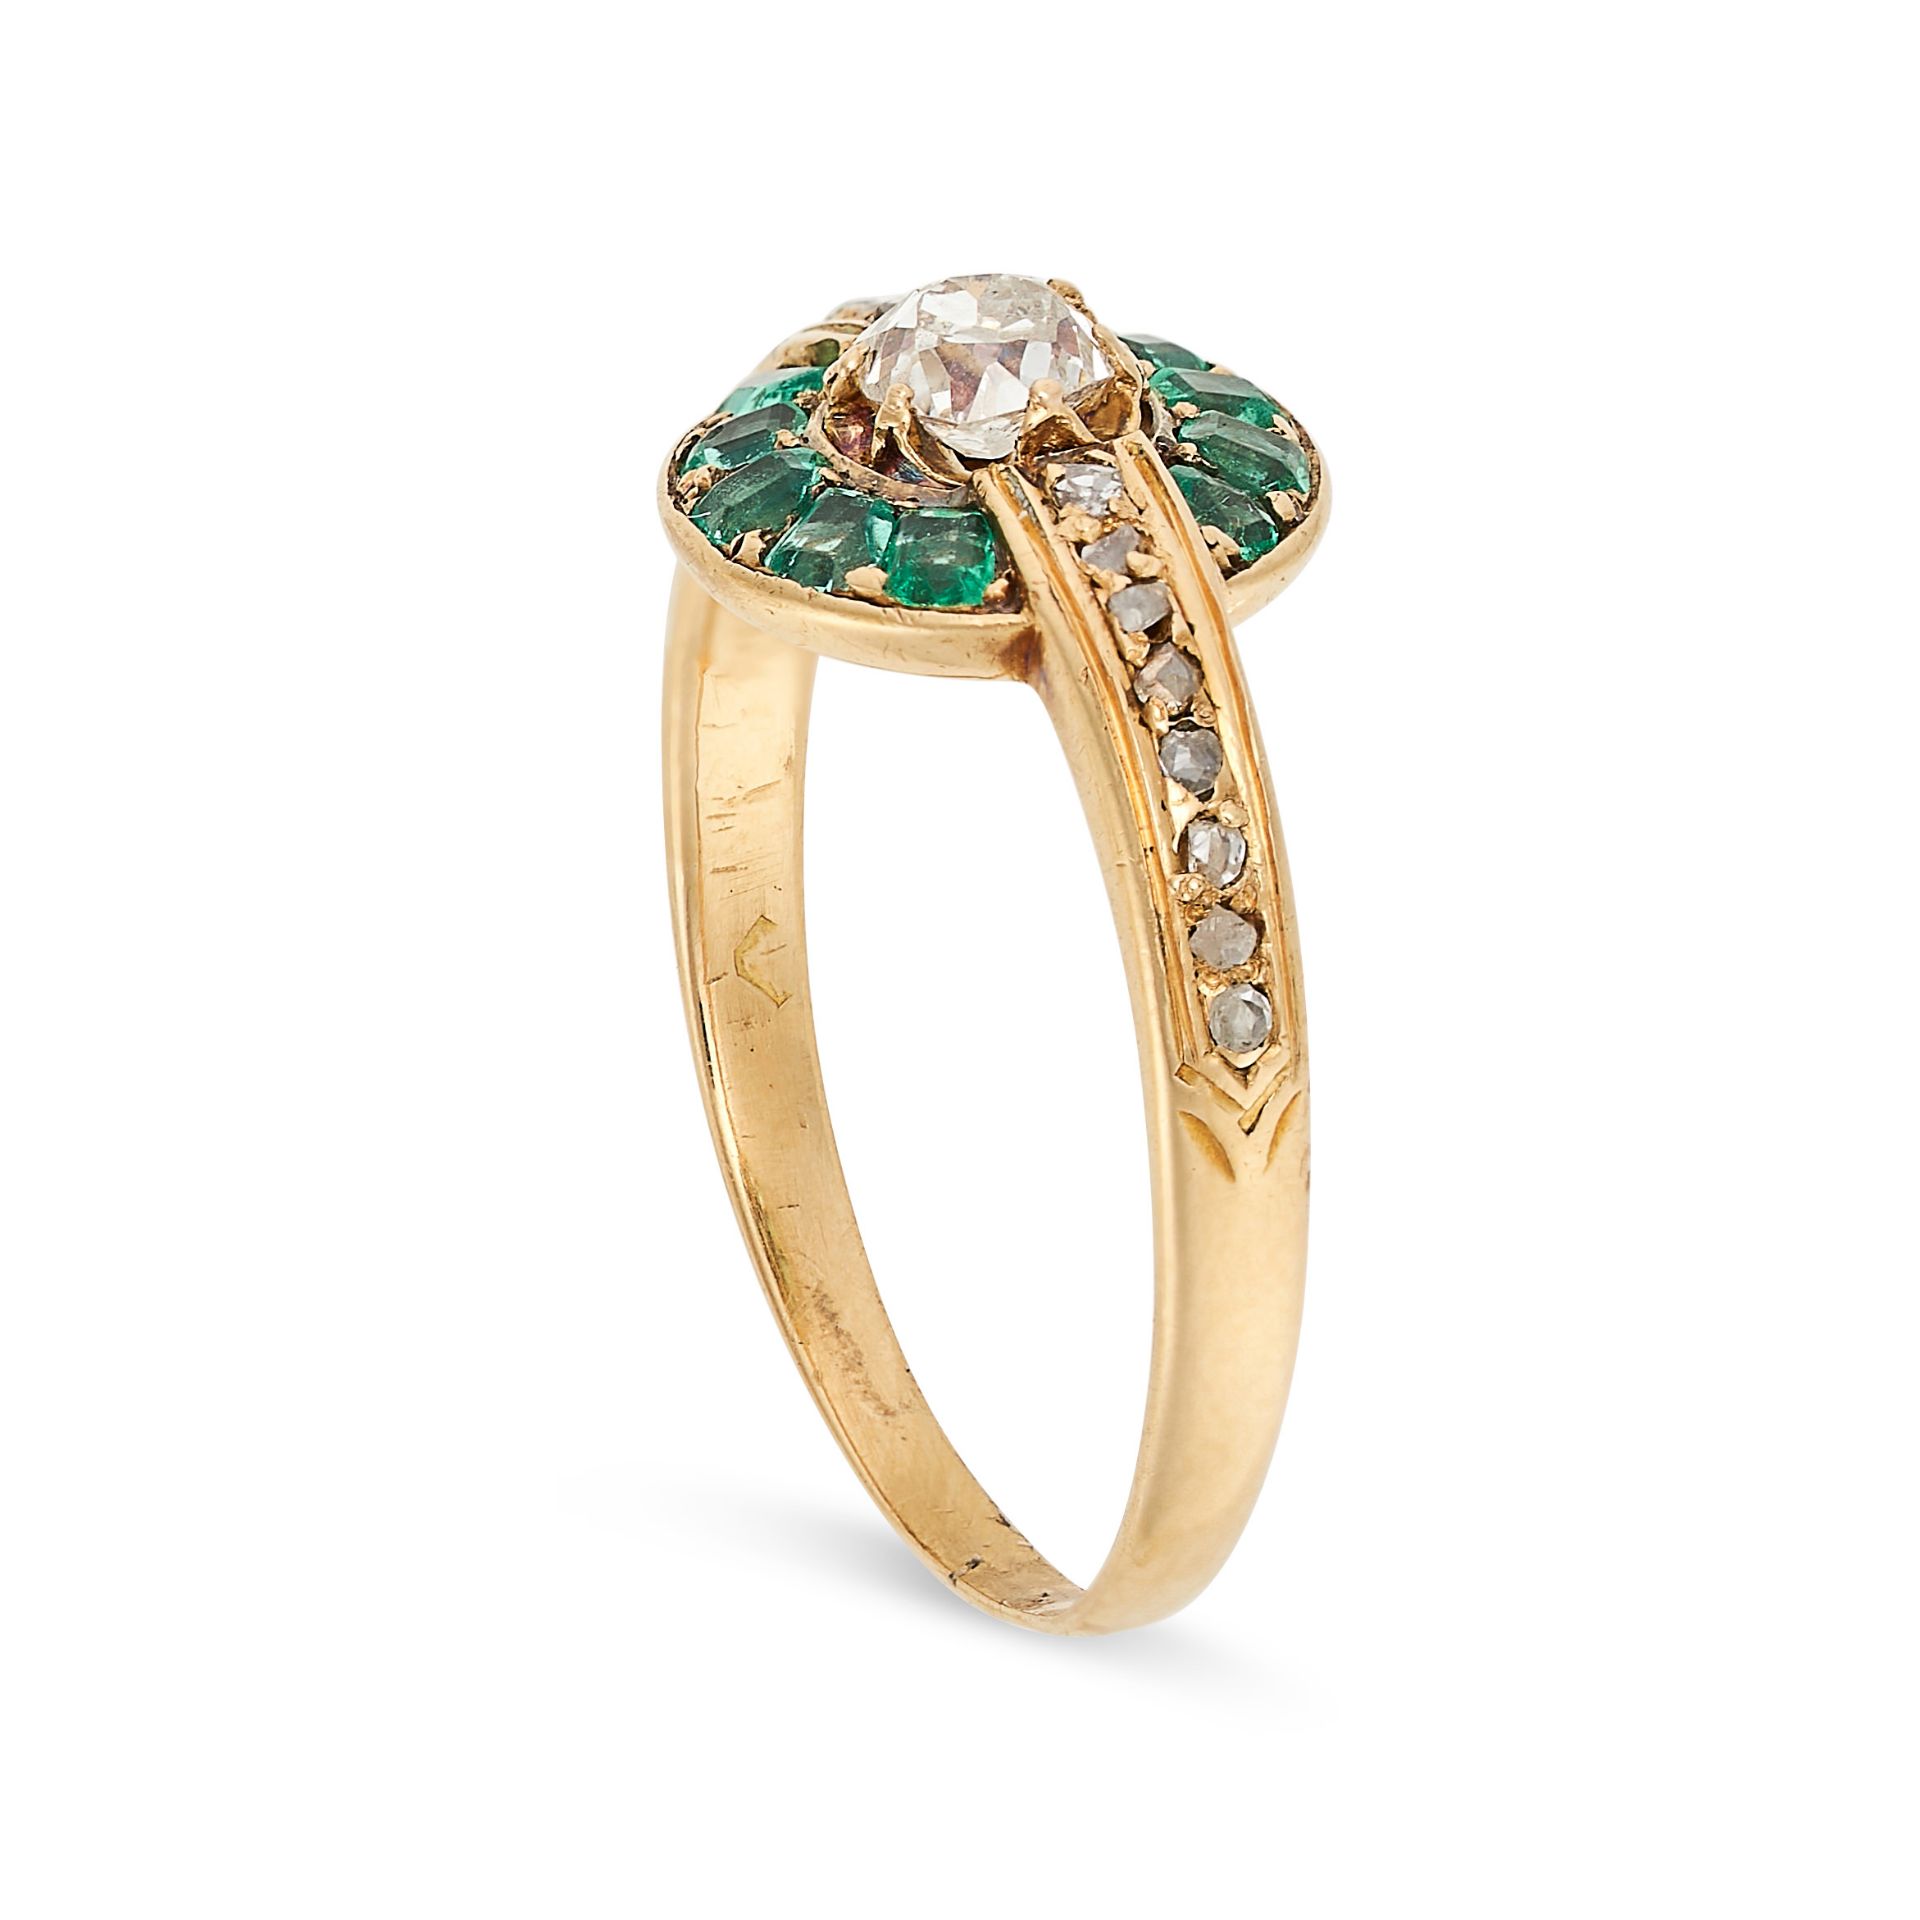 AN EMERALD AND DIAMOND RING set with an old cut diamond in a border of cushion cut emeralds, the - Image 2 of 2